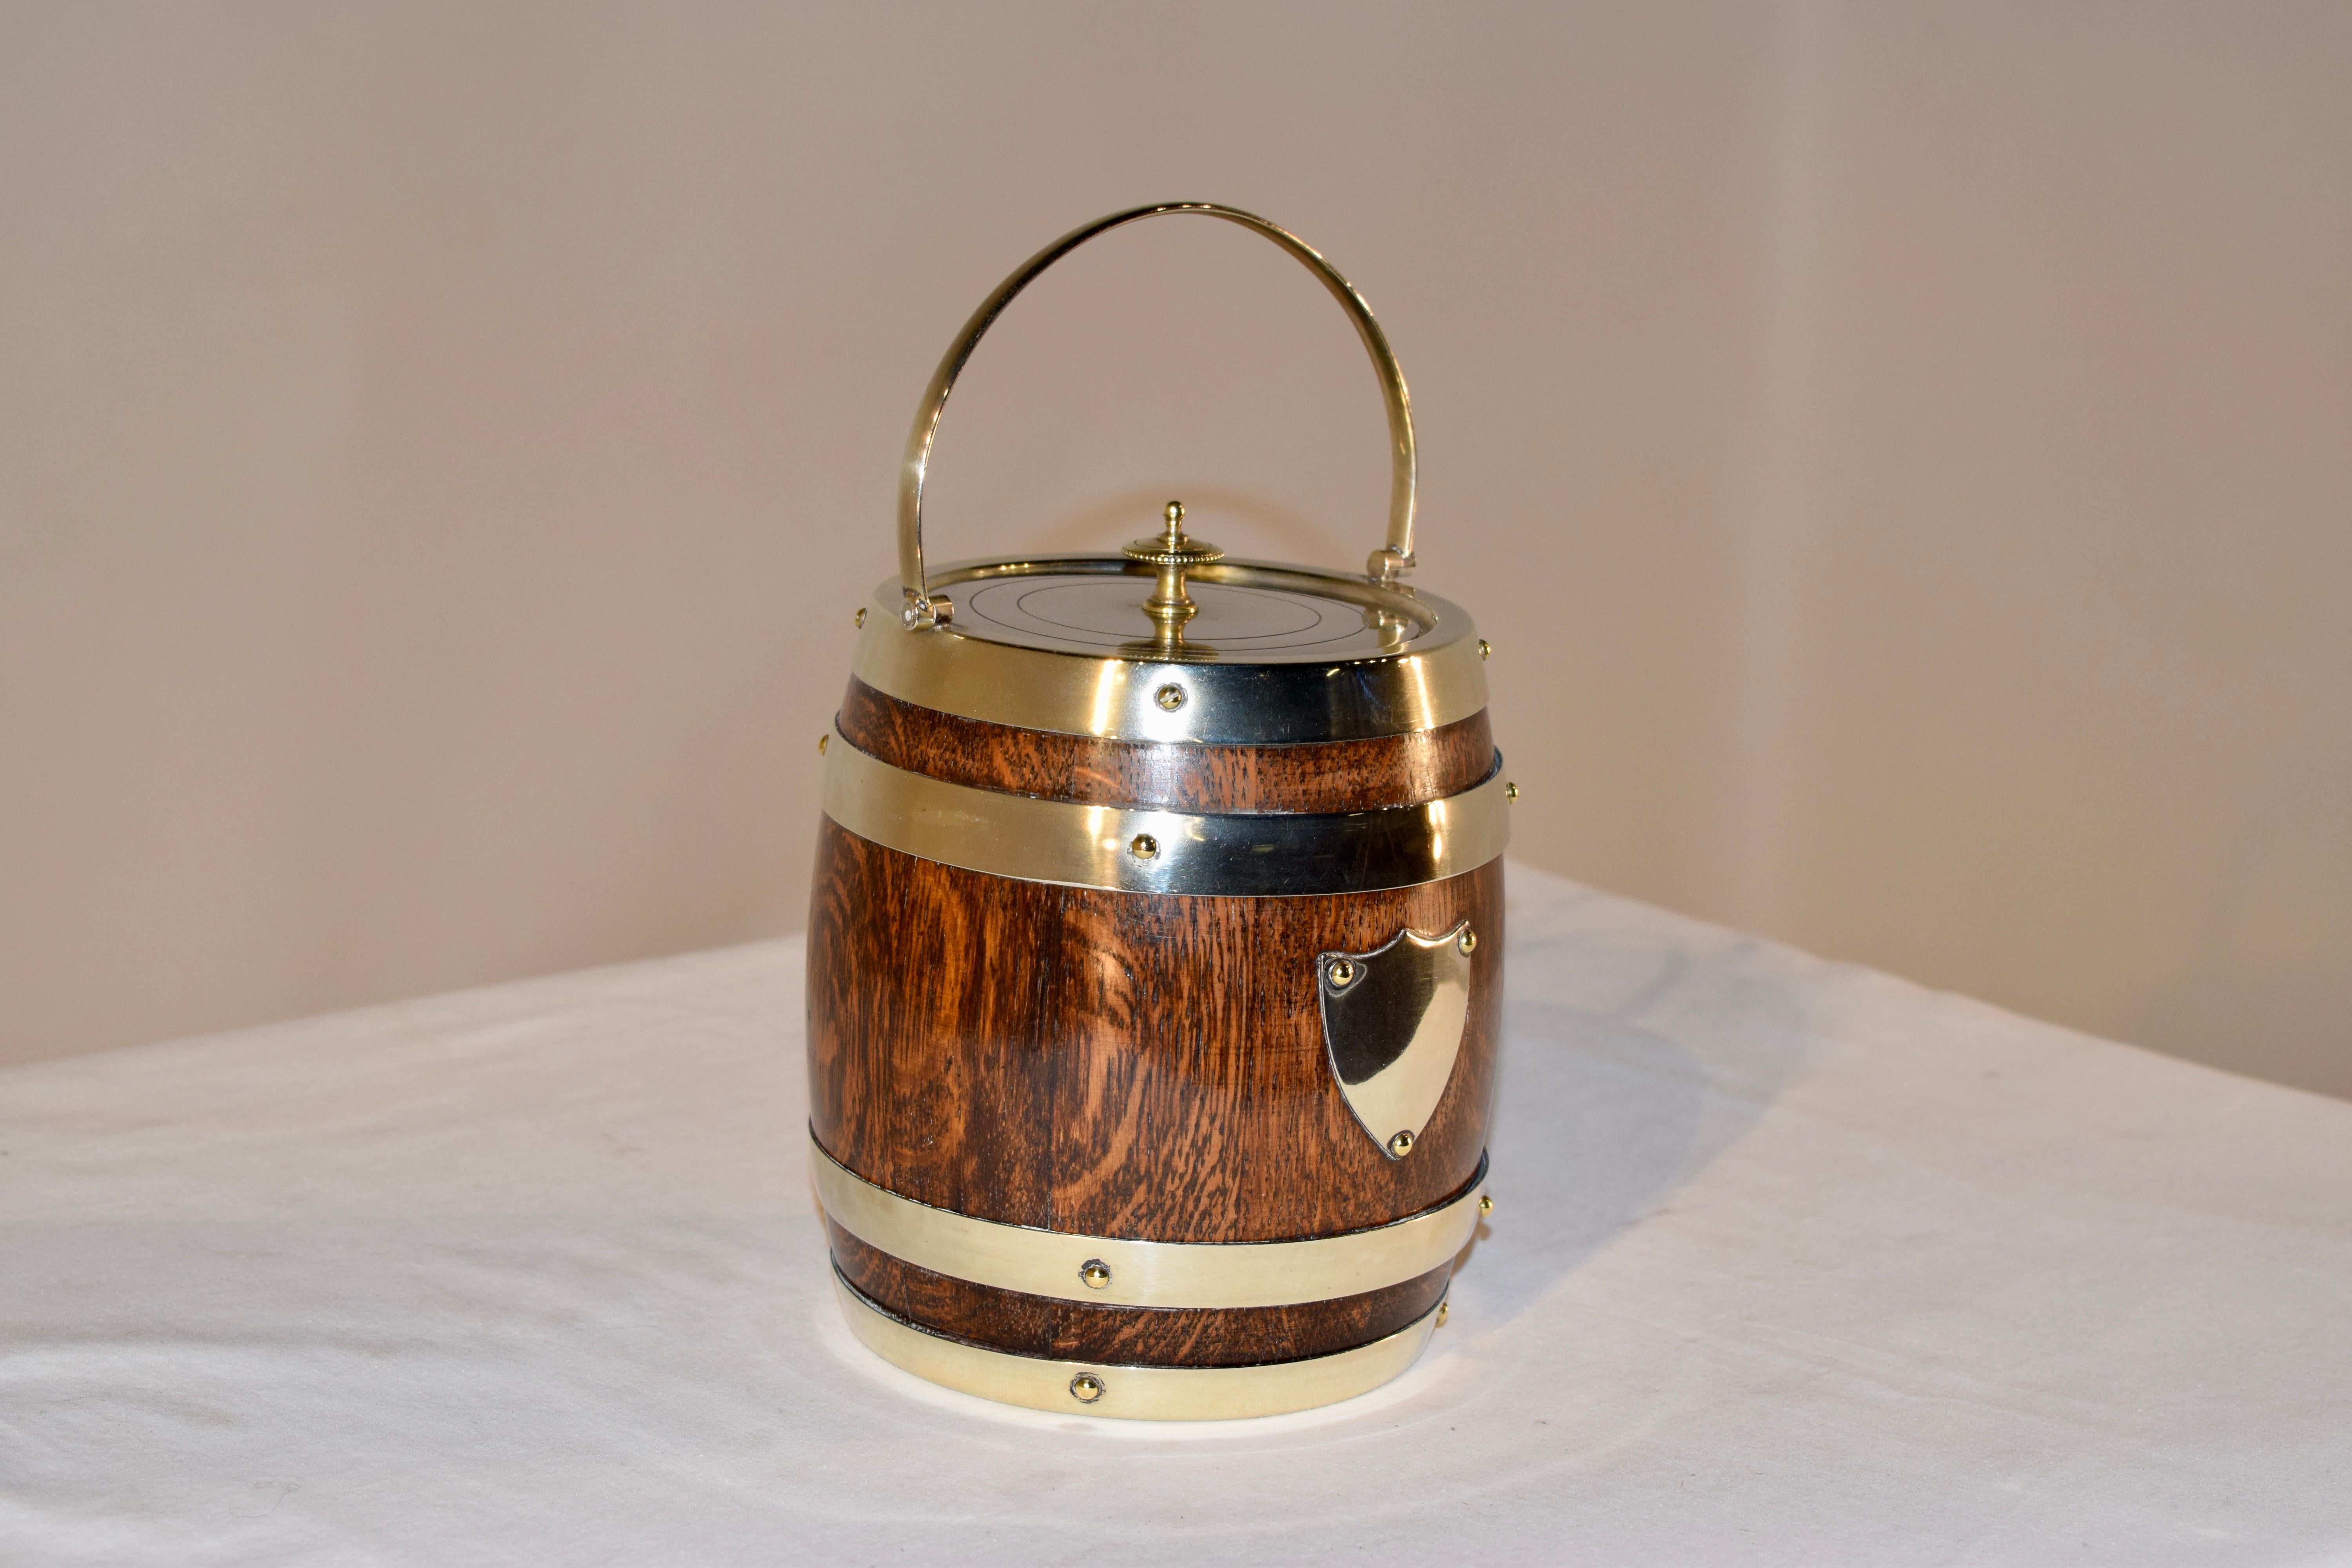 English oak biscuit barrel, made by Daniel and Arter of Birmingham. The barrel is made from oak and retains the original porcelain liner, and is strapped with silver plated bands, as well as a silver plated handle, lid, collar and bottom band.